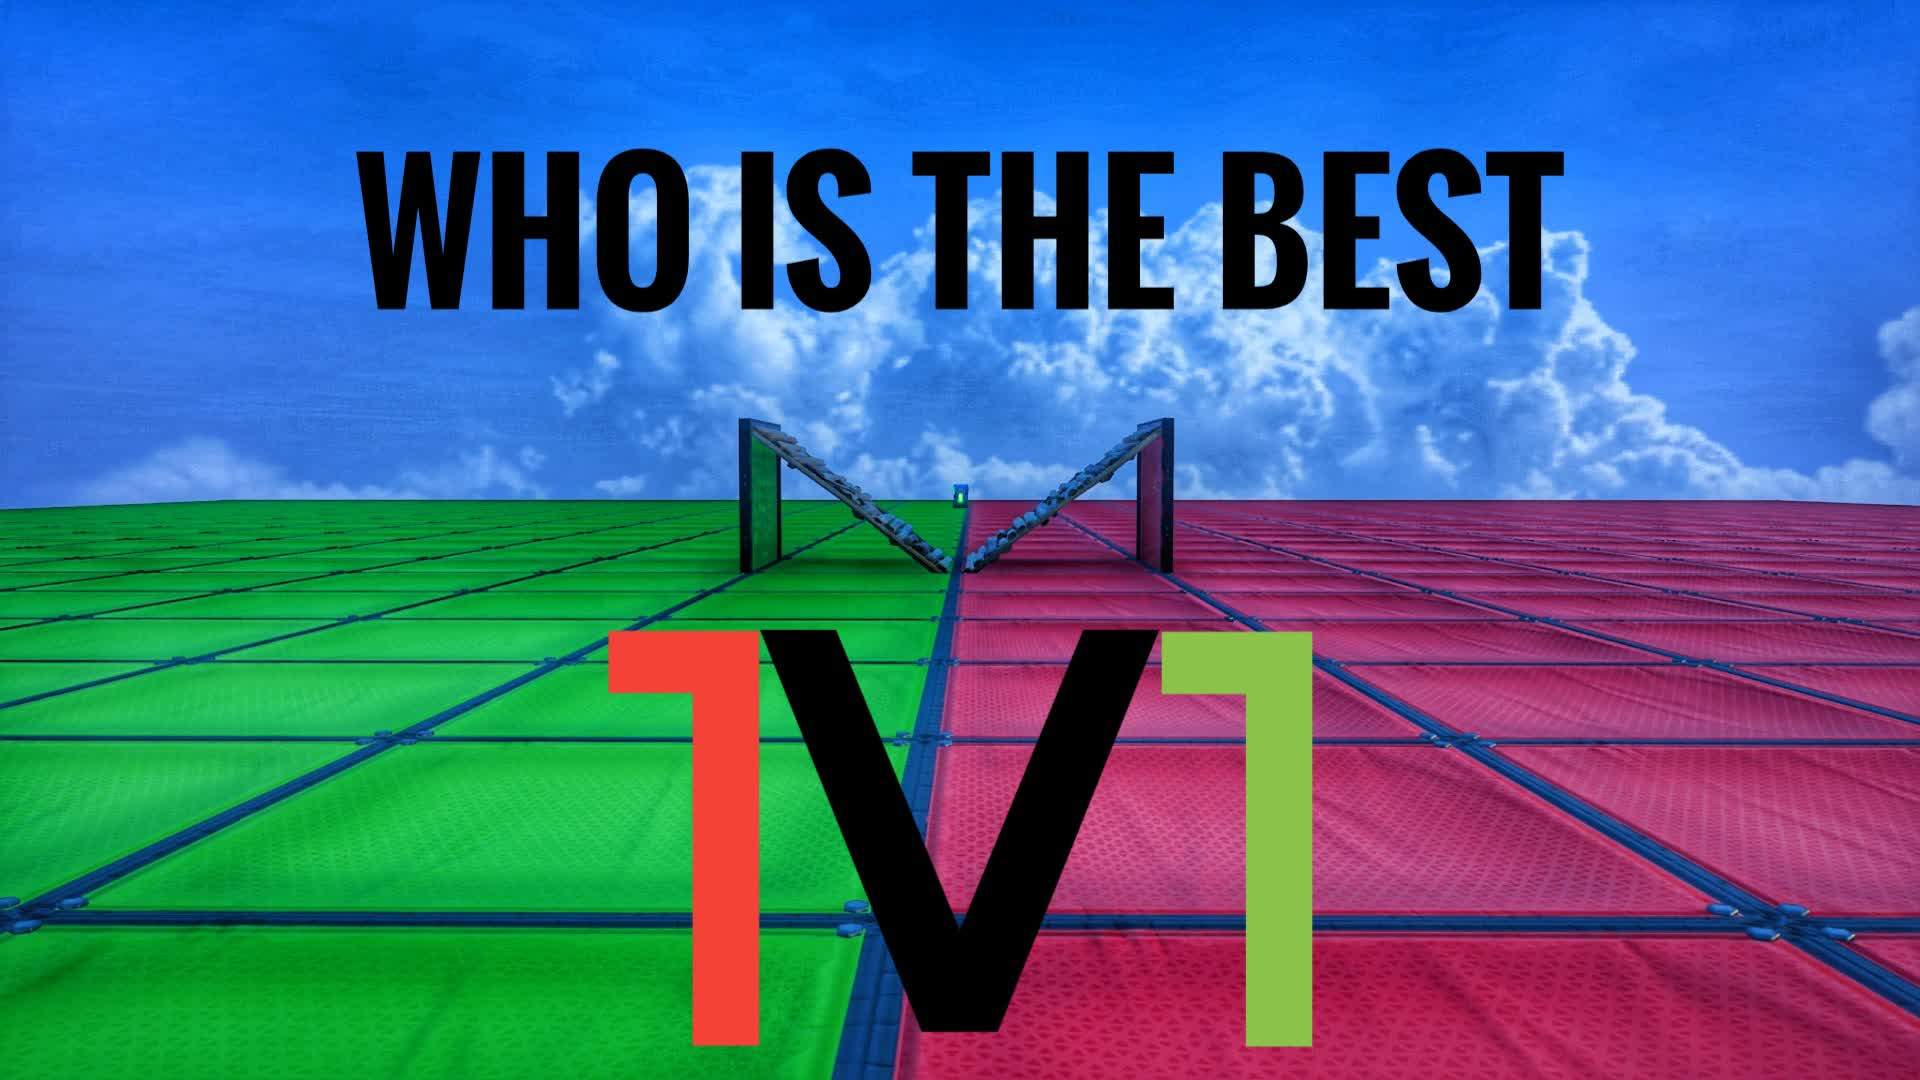 Who is the best 1V1